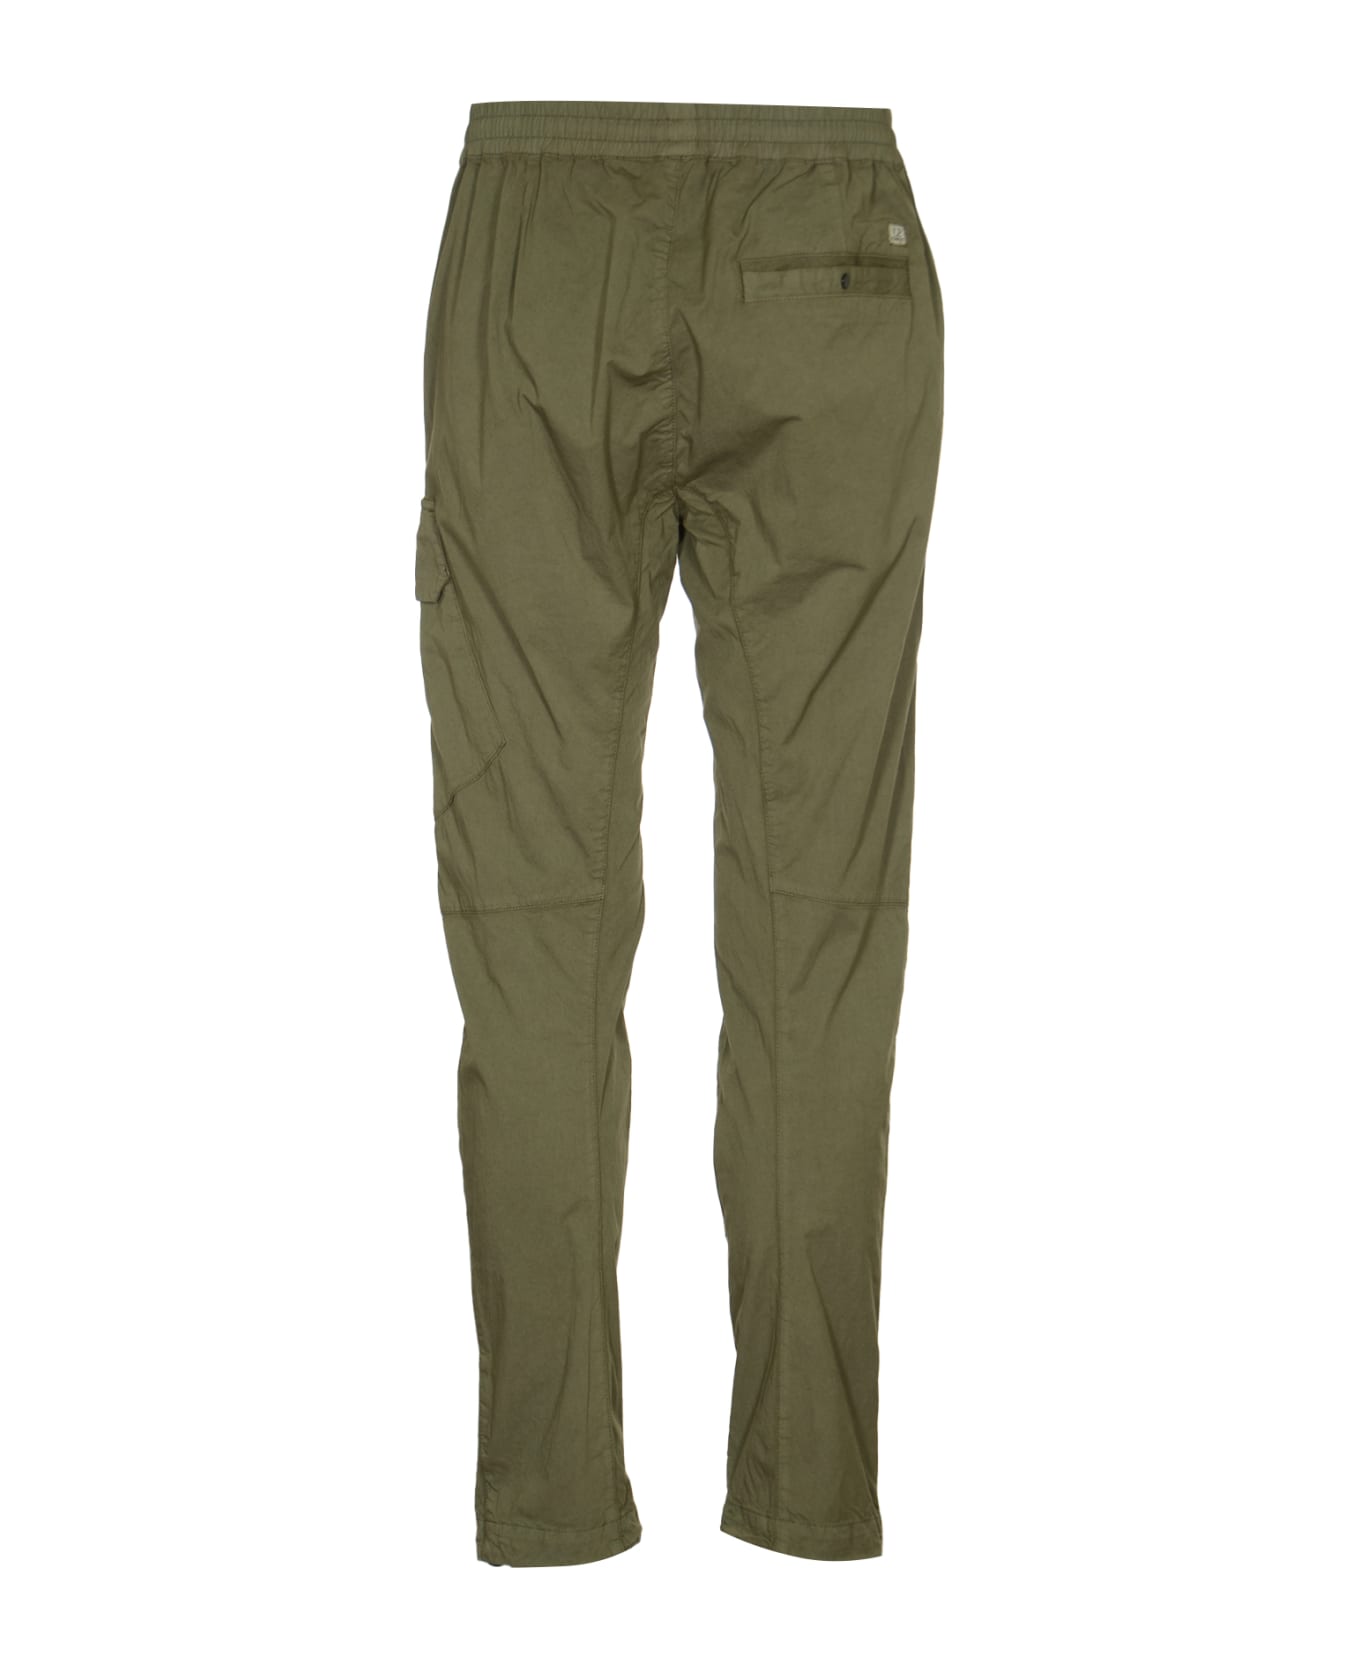 C.P. Company Twill Stretch Cargo Pants - AGAVE GREEN ボトムス